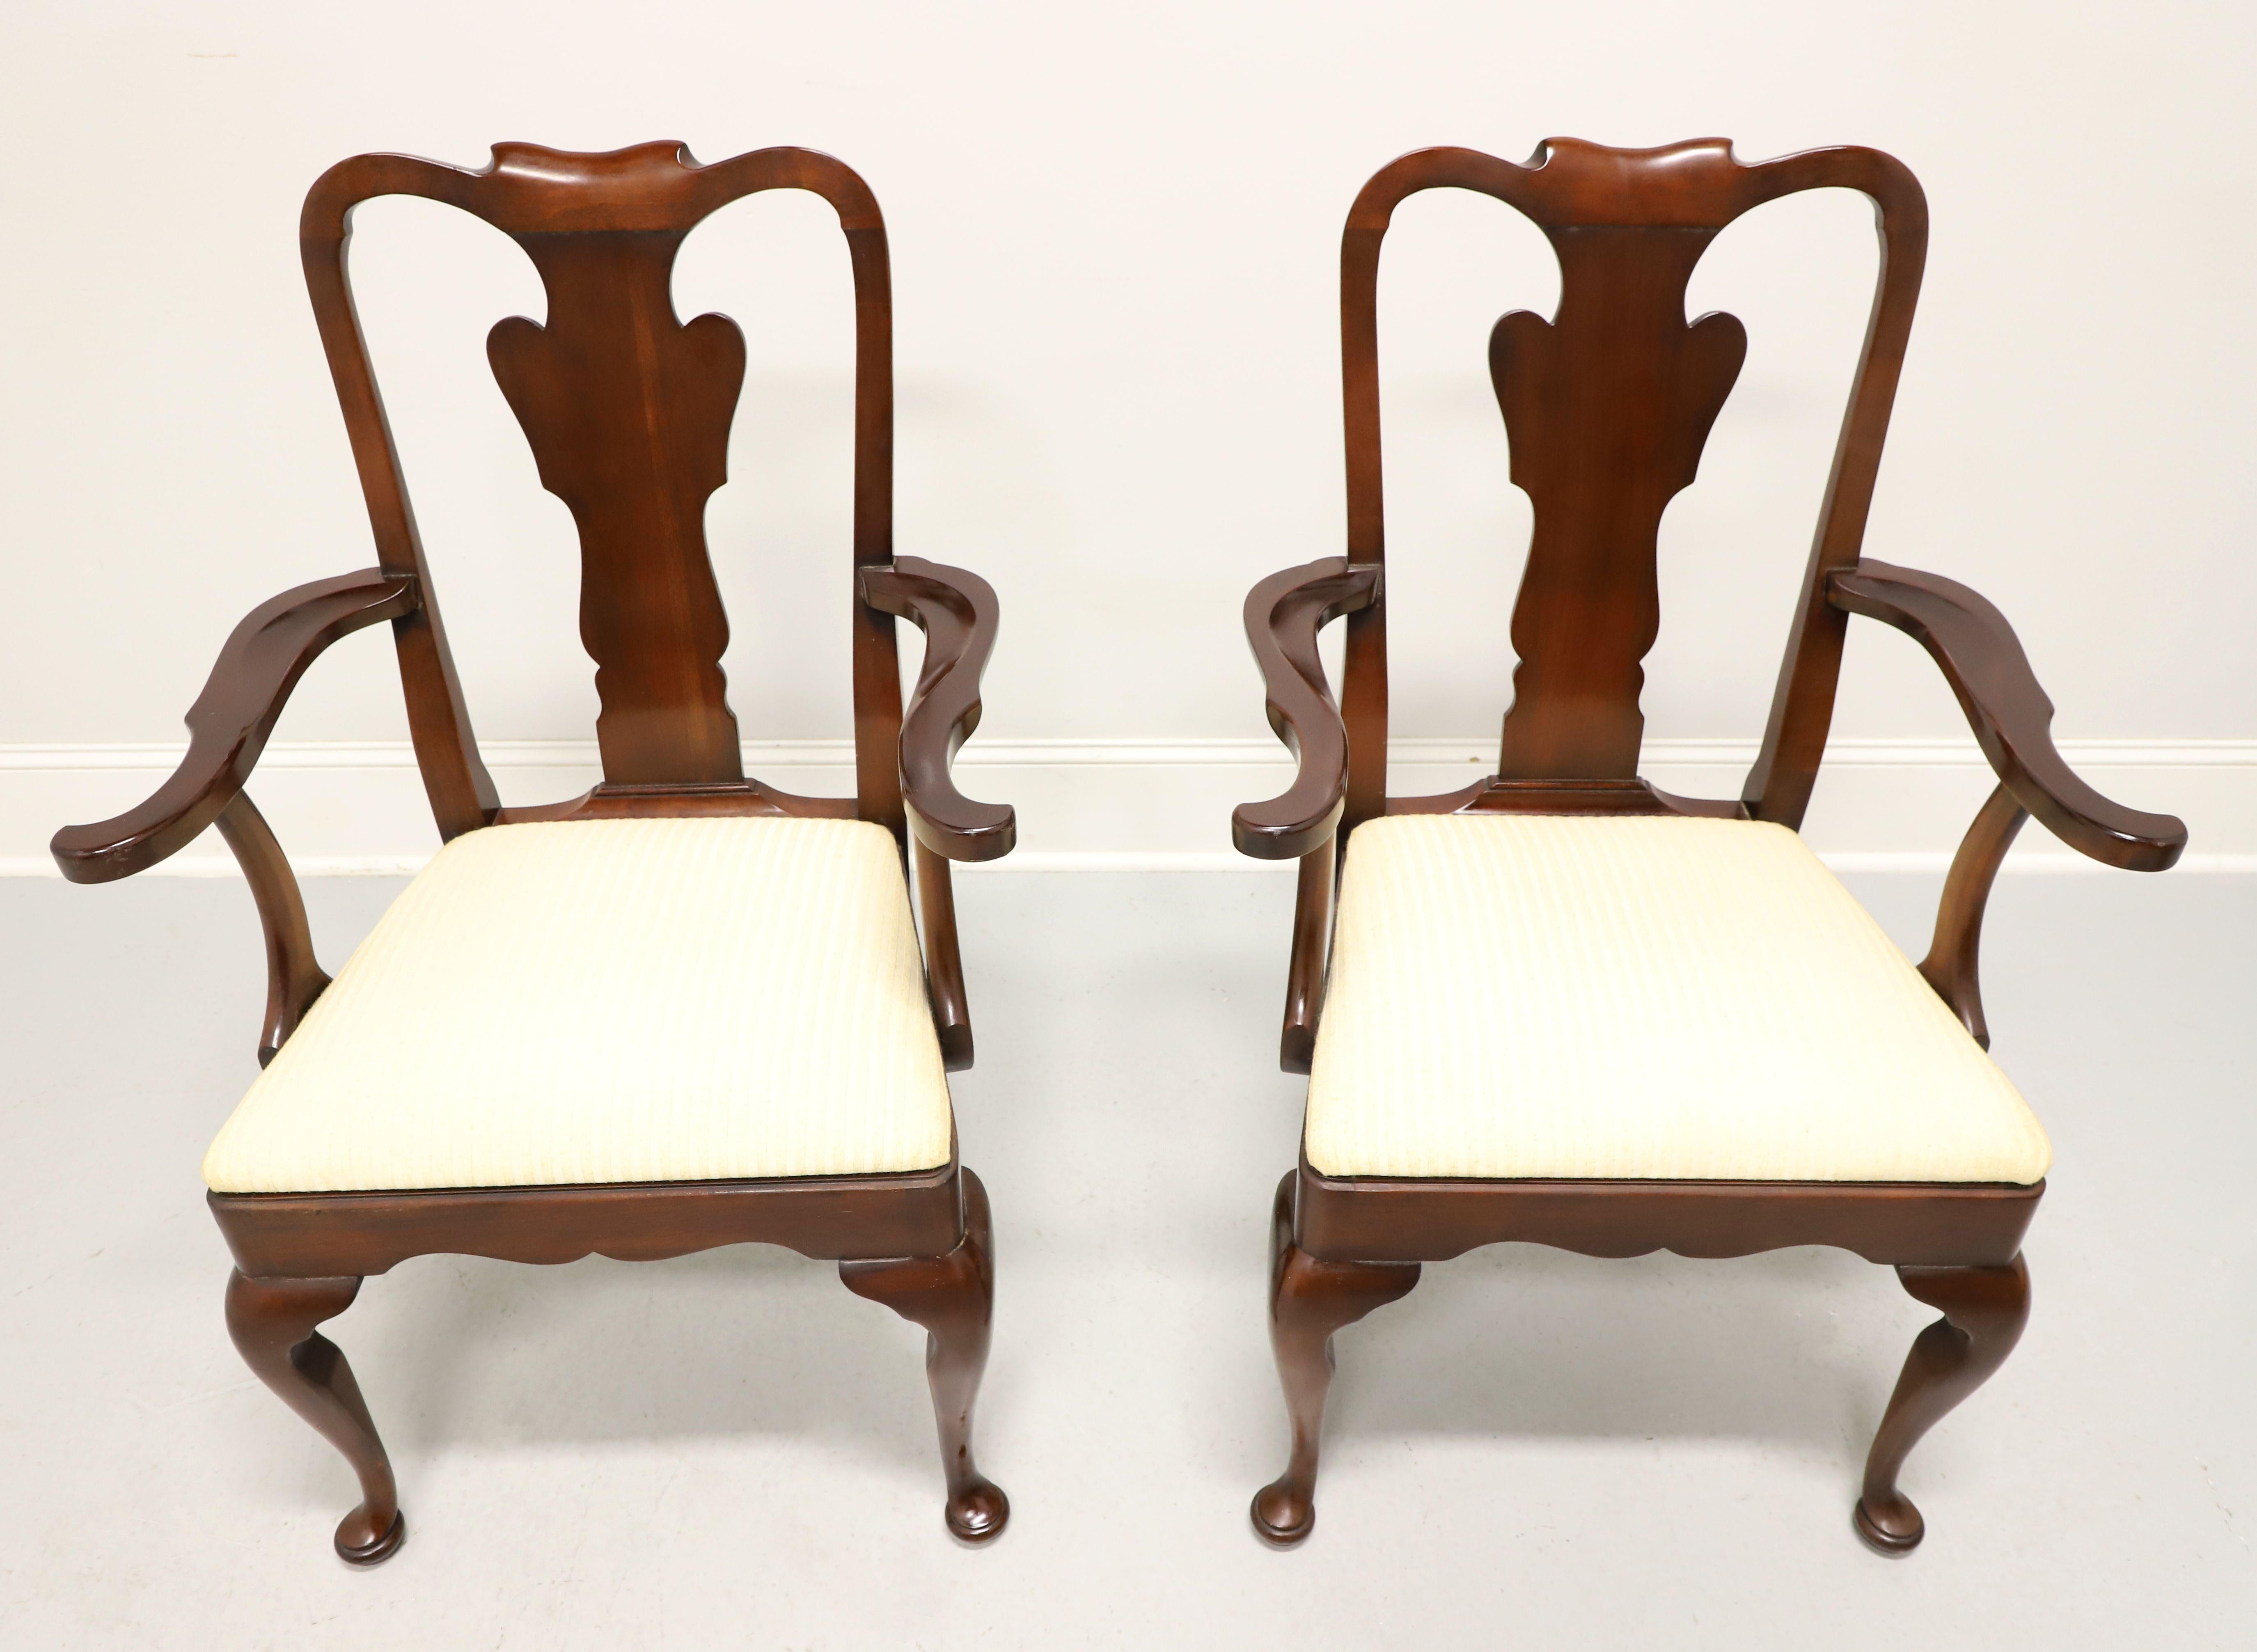 A pair of Queen Anne style dining armchairs by Statton Furniture. Solid cherry wood with their Old Towne finish, rounded crest rail, curved carved arms & curved supports, carved backrest & apron, neutral cream color textured fabric upholstered seat,